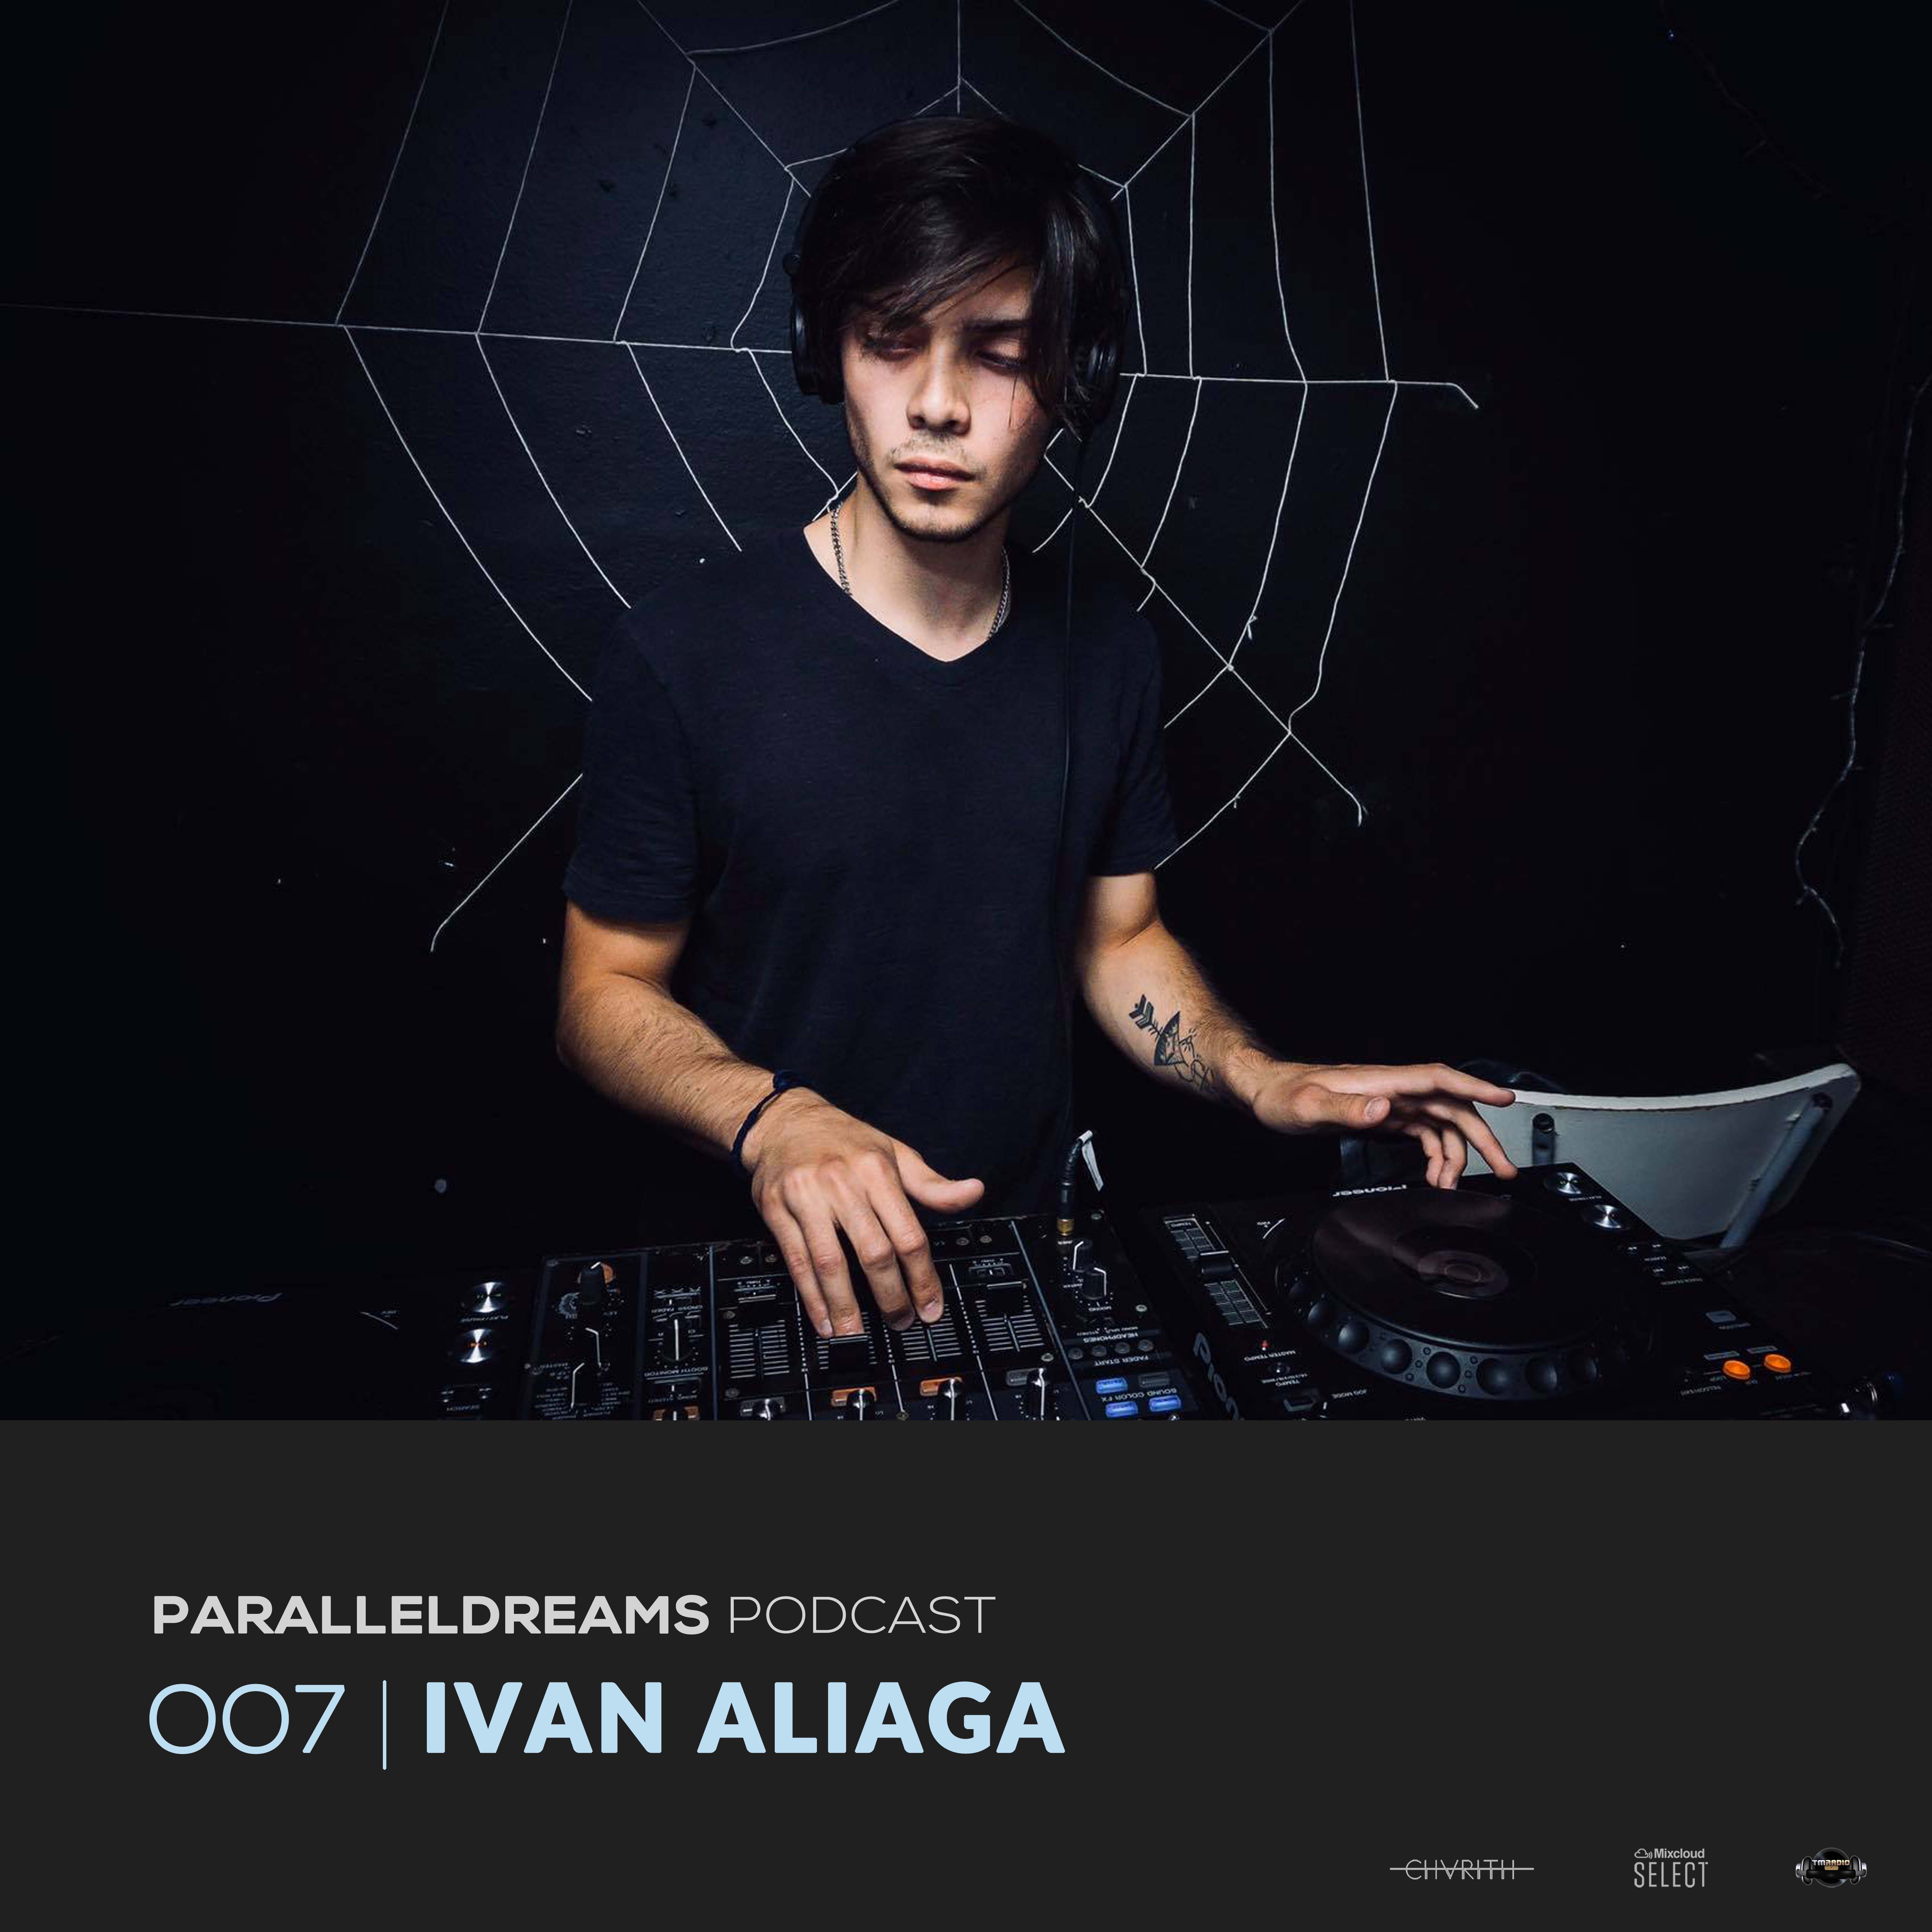 Episode 007 | IVAN ALIAGA (from July 3rd, 2020)